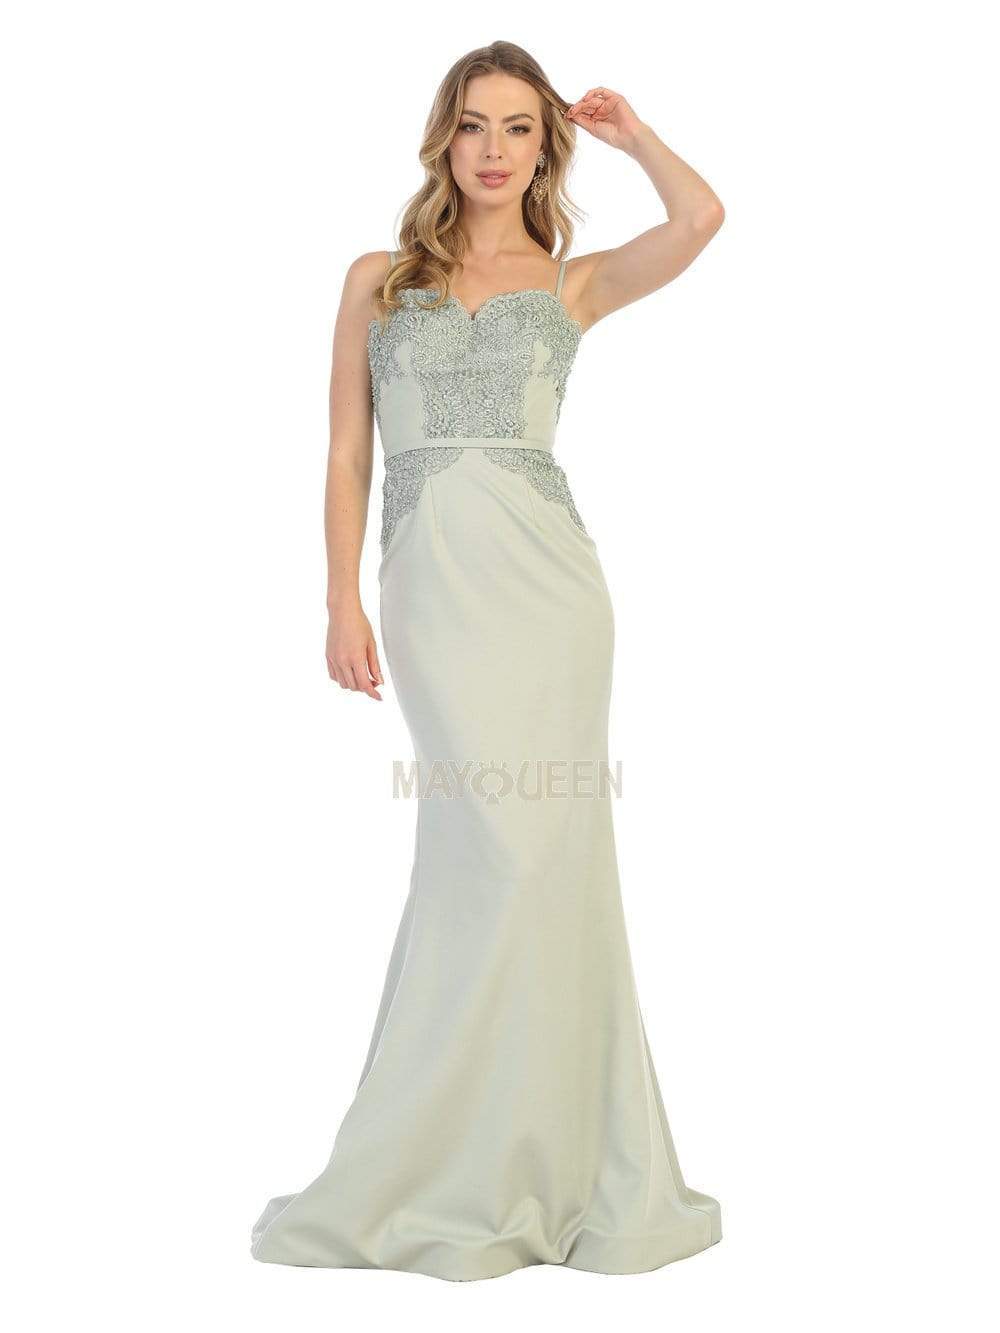 May Queen - MQ1759 Scallop Lace Appliqued Sweetheart Bodice Dress Prom Dresses 4 / Sage